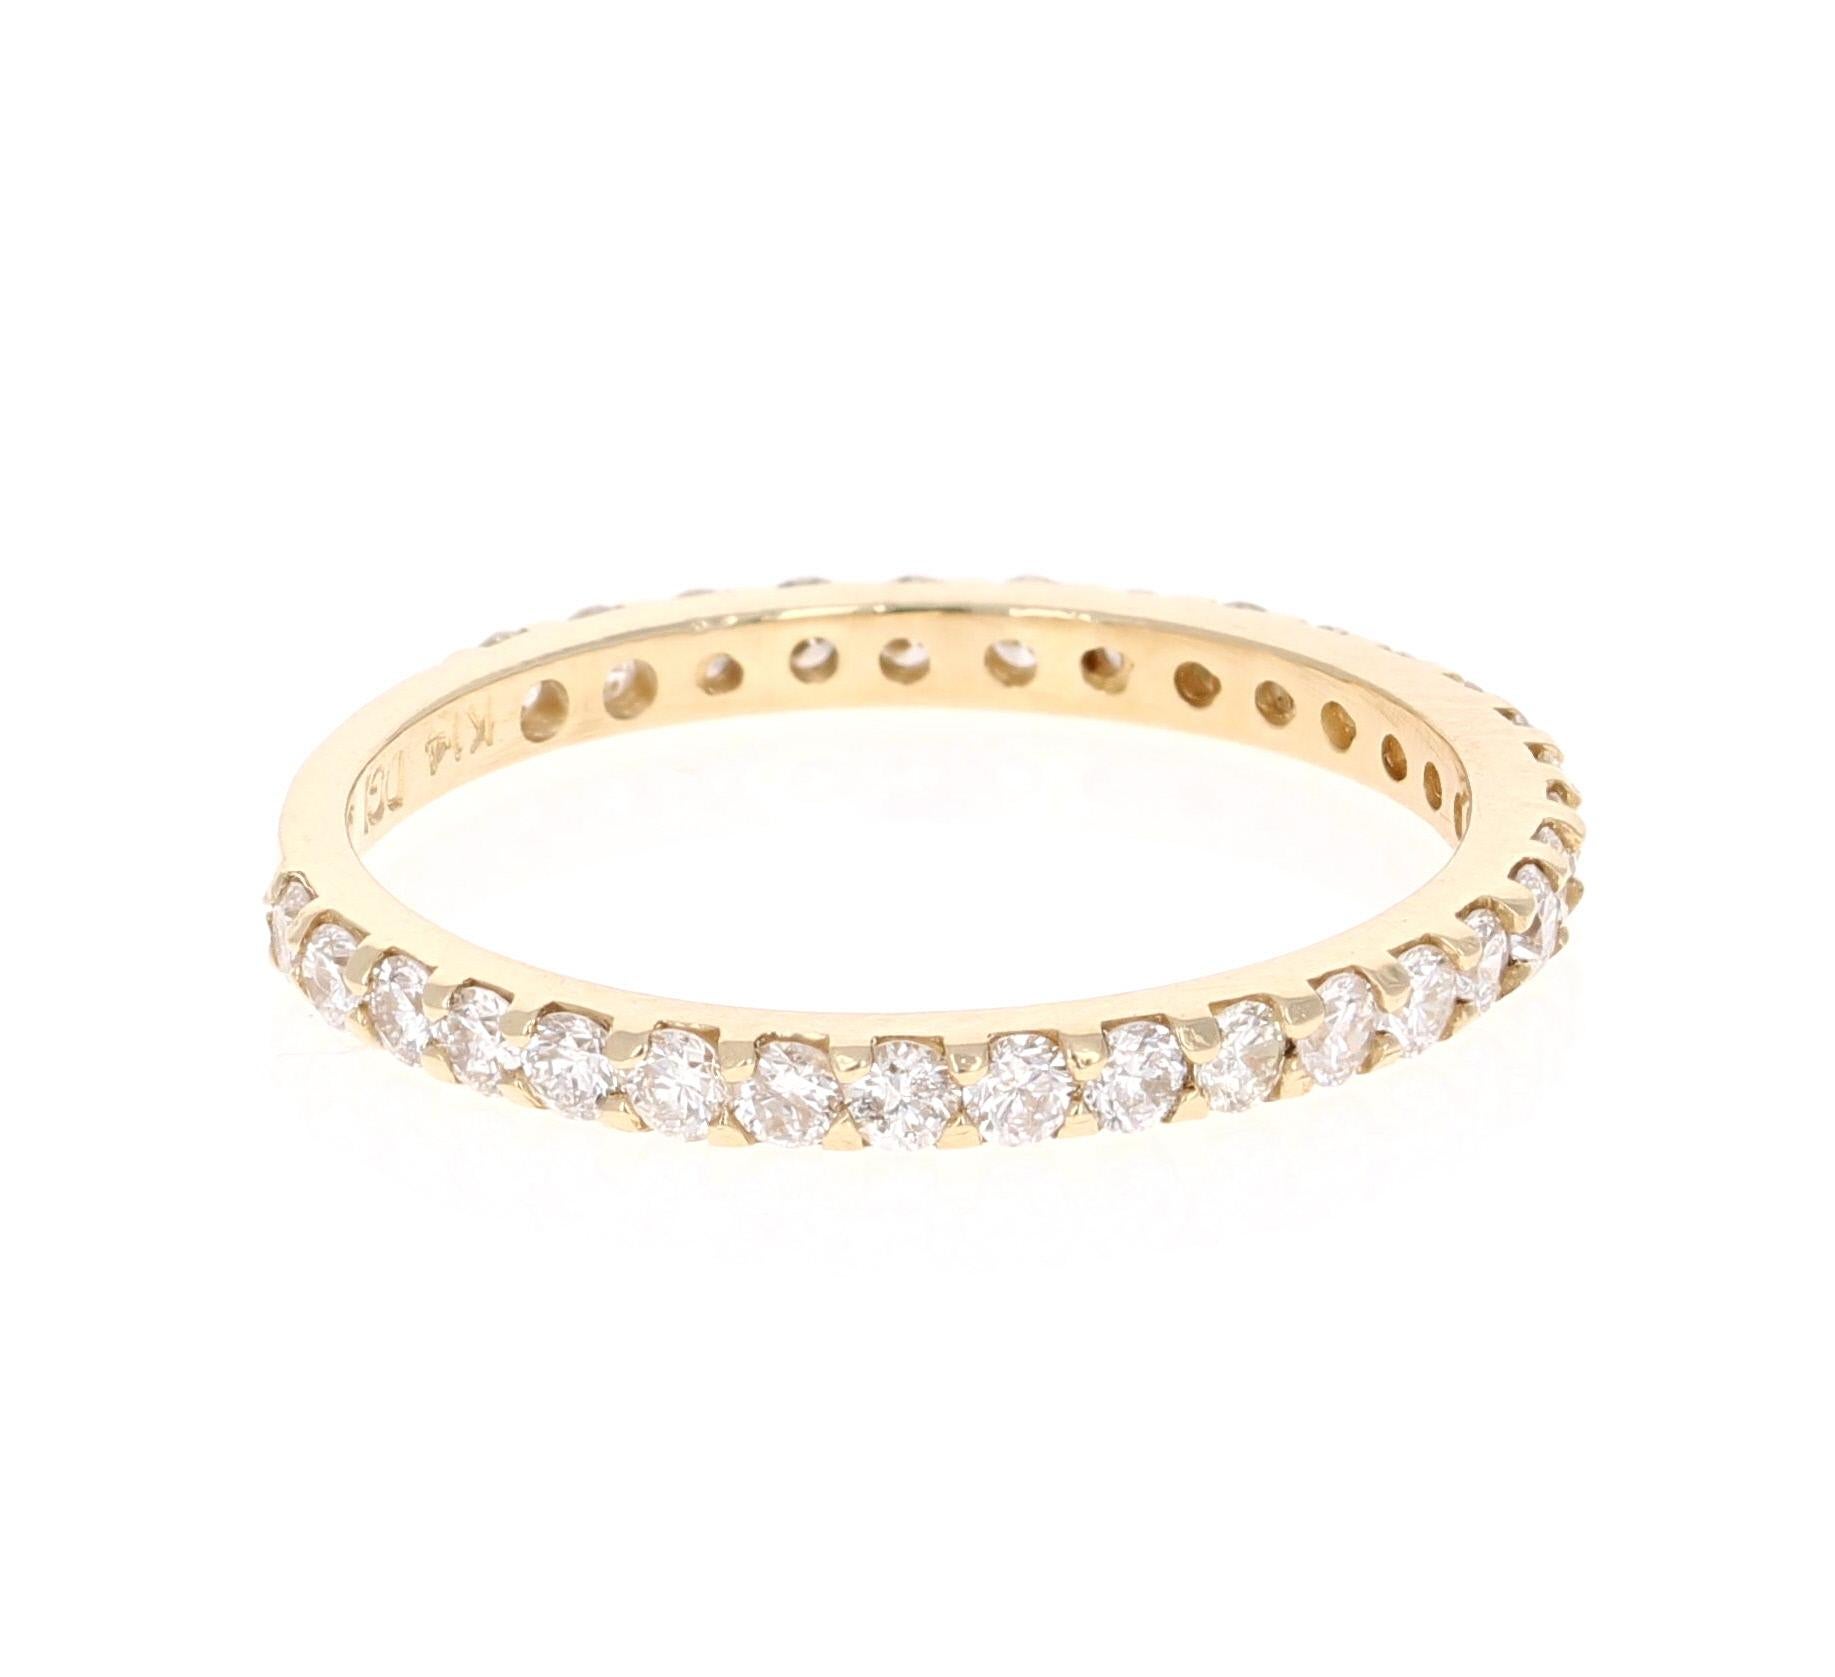 A beautiful band that can be worn as a single band or stack with other bands in other colors of Gold! 

This ring has 30 Round Cut Diamonds that weigh 0.66 Carats. The clarity and color of the diamonds are SI-F.

Crafted in 14 Karat Yellow Gold and